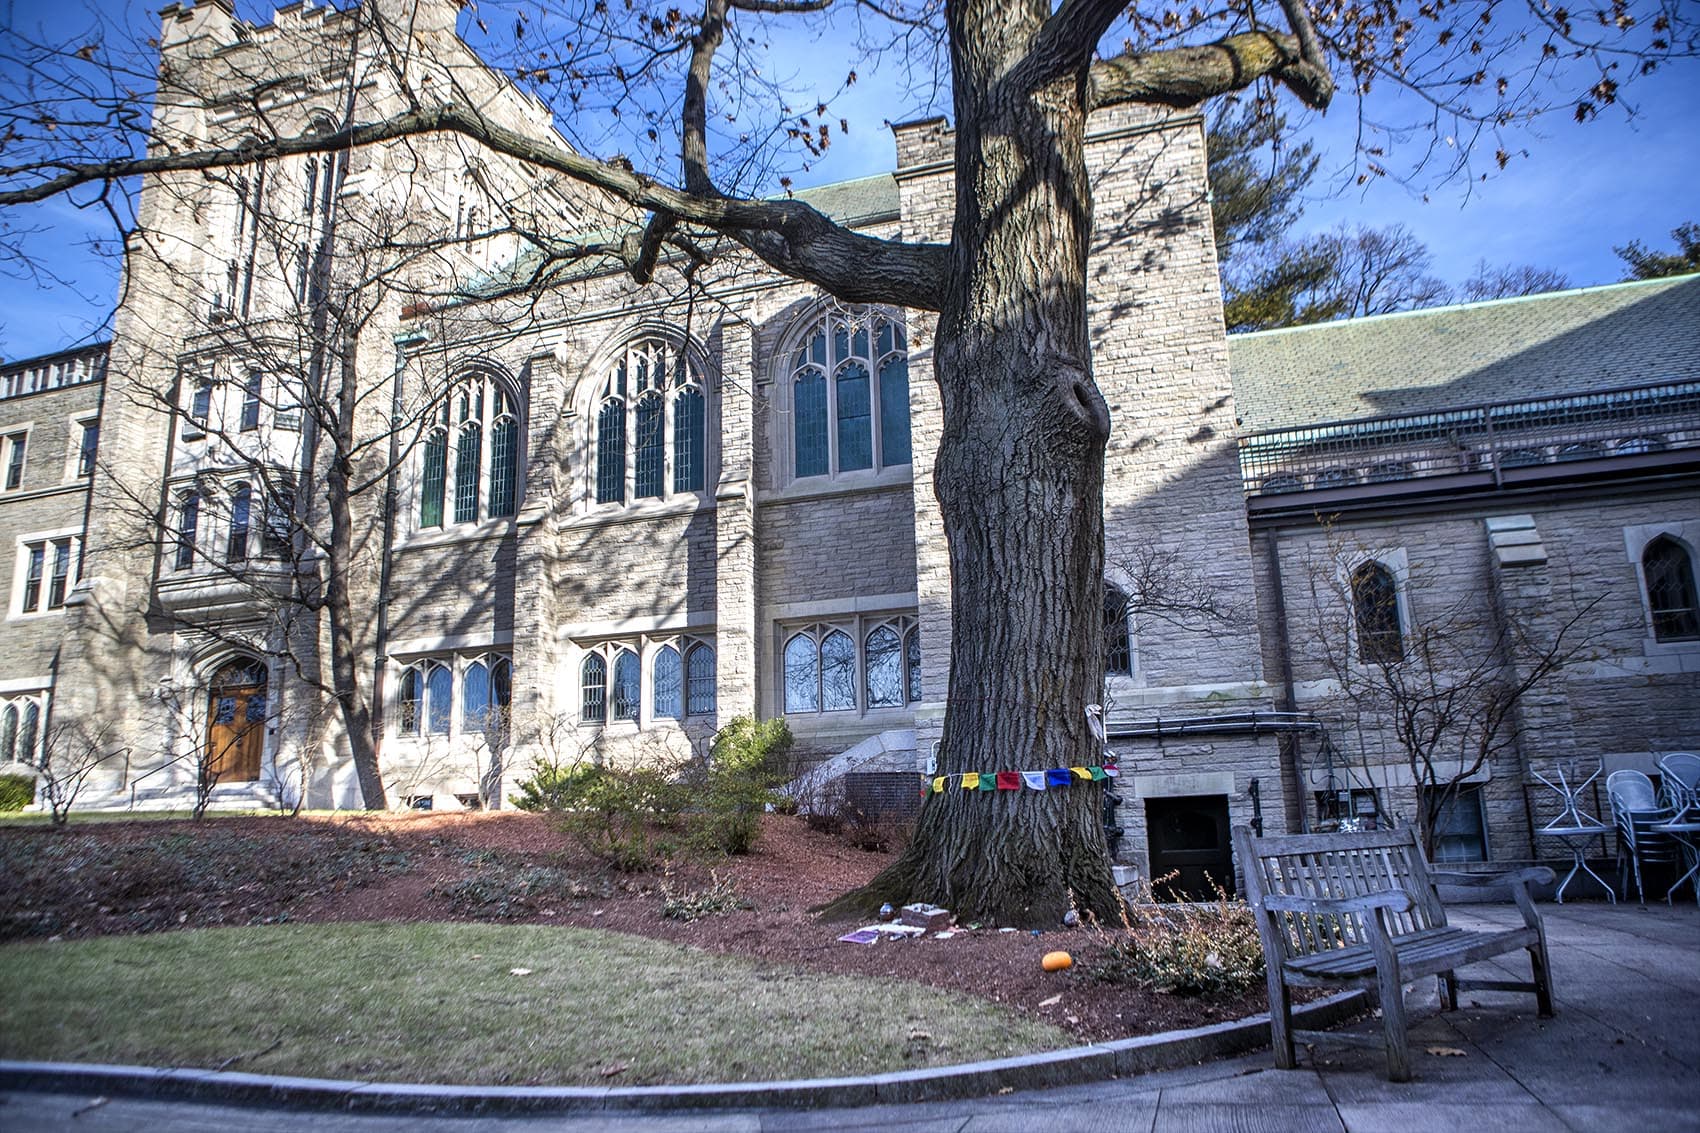 The large red oak tree is at the center of a debate at the Harvard Divinity School. The tree is slated for removal to make room to renovate and expand Andover Hall. (Jesse Costa/WBUR)